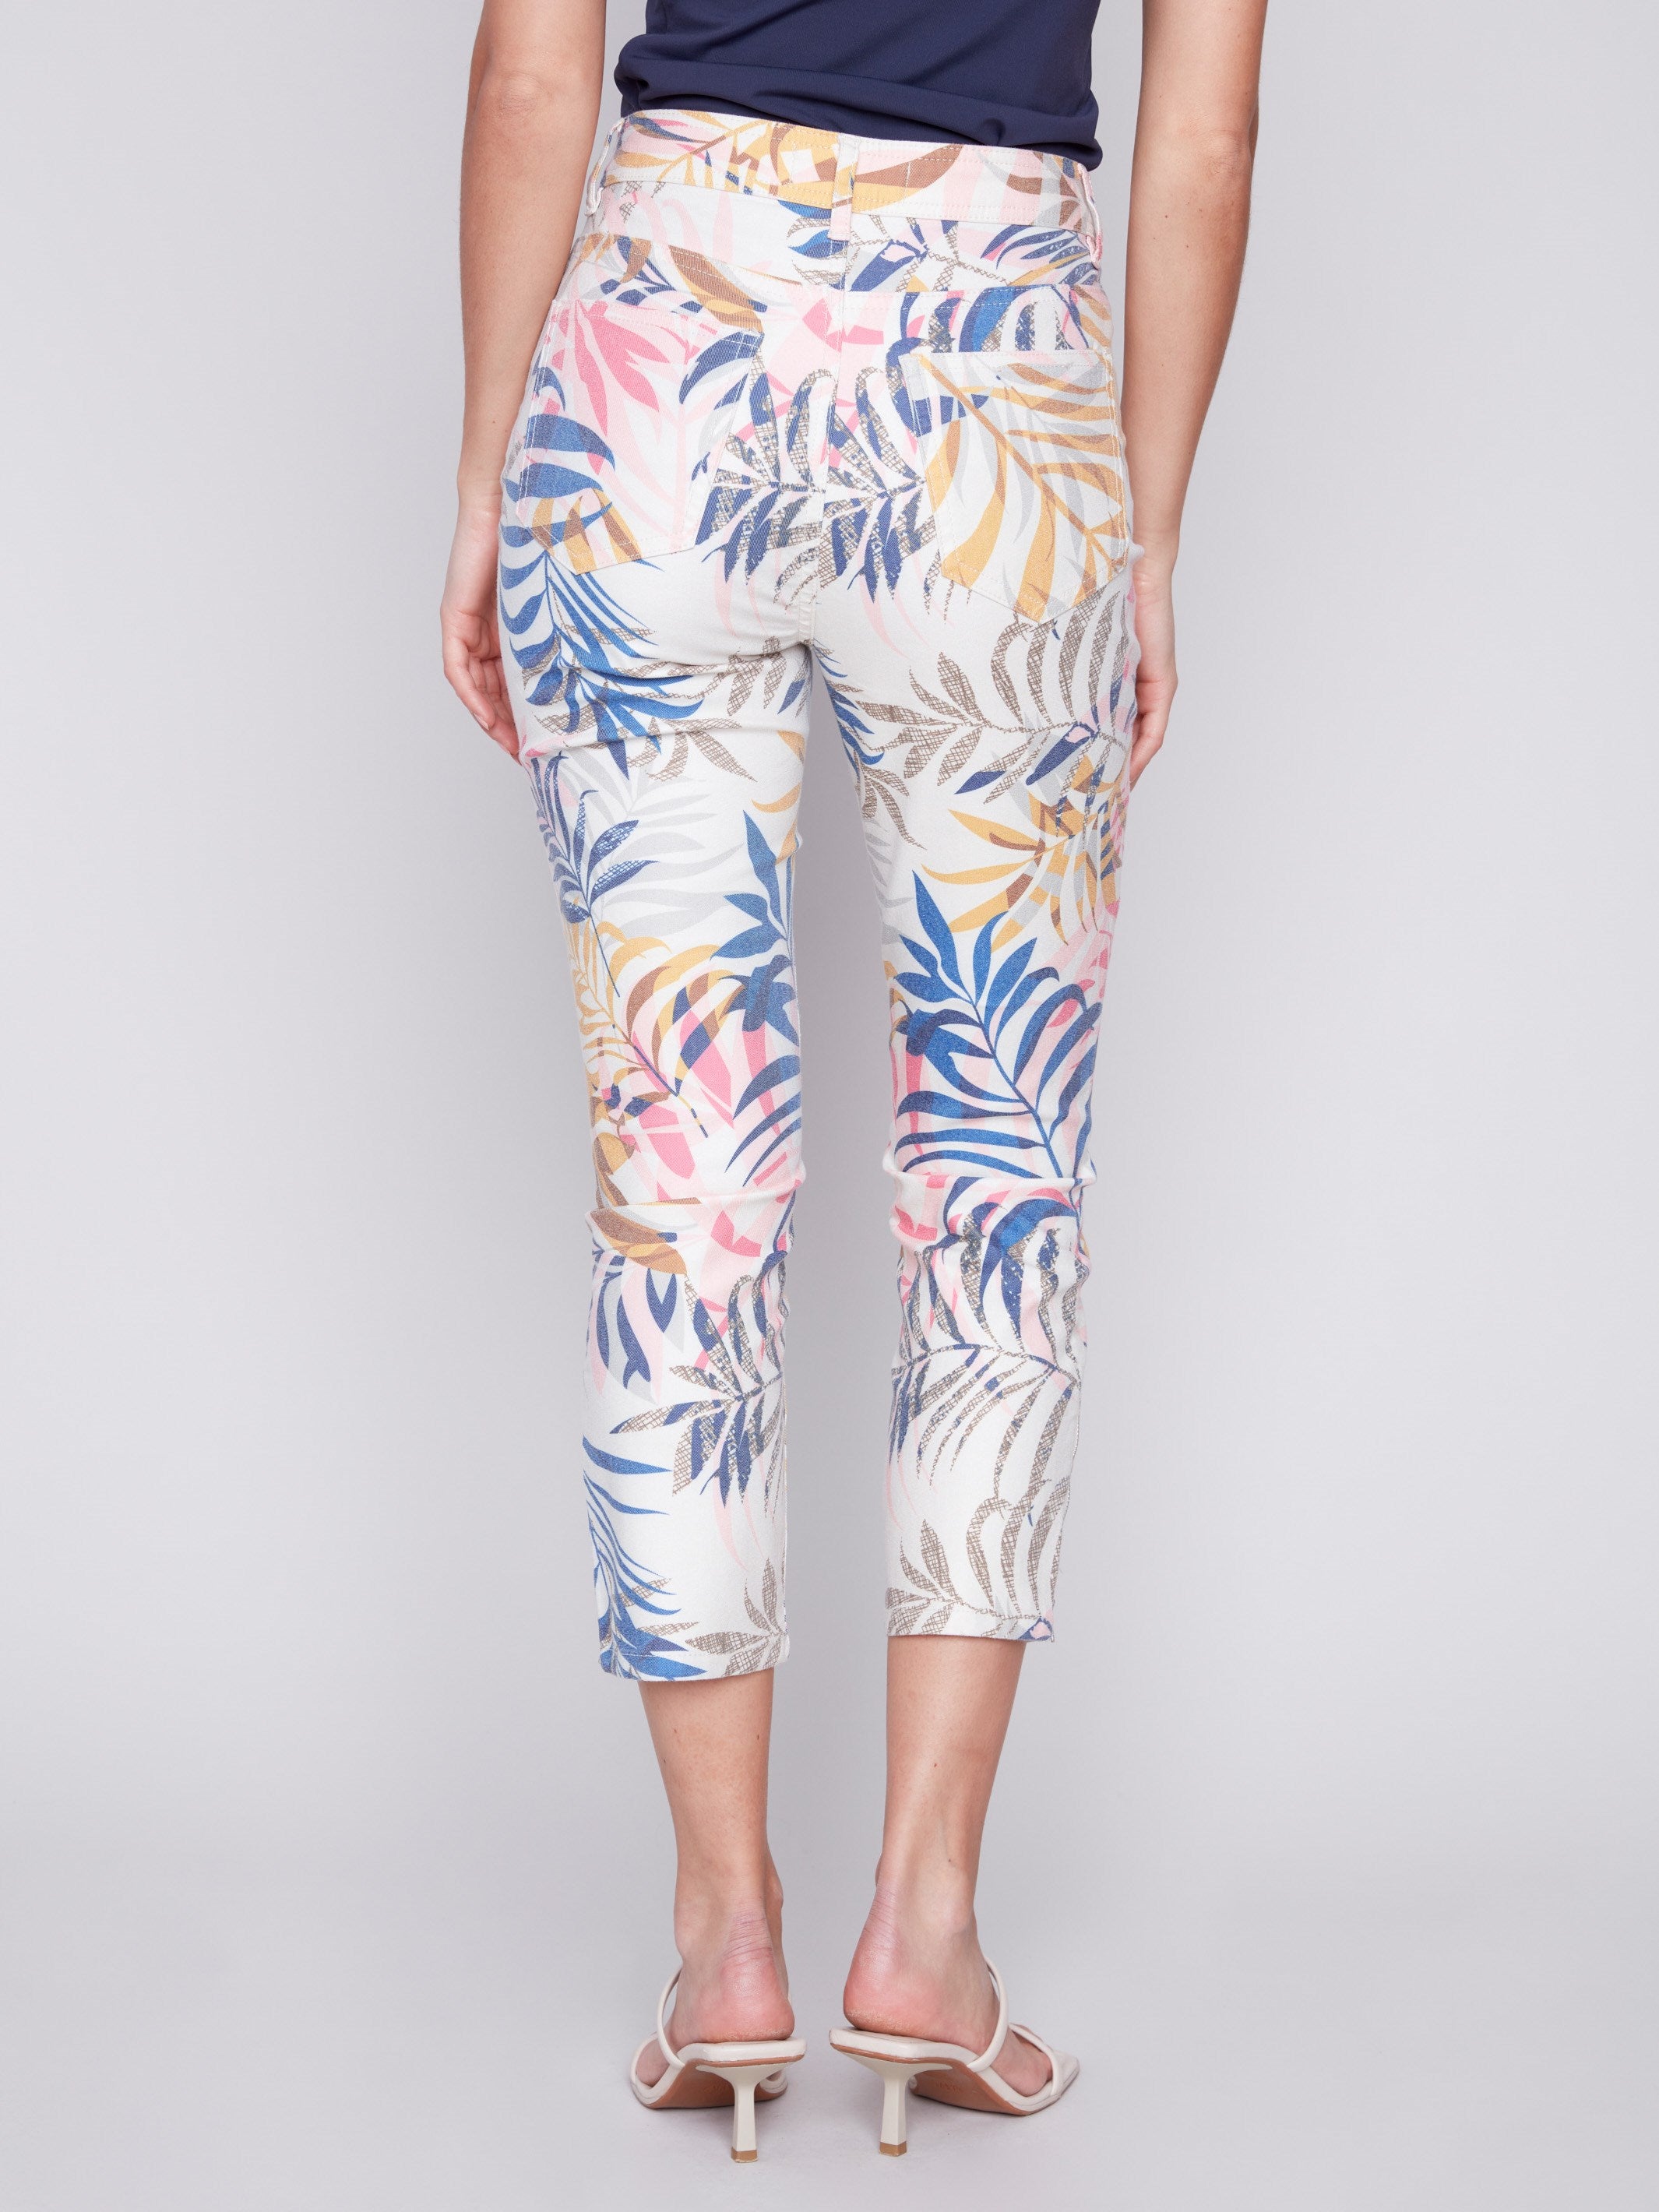 Charlie B Printed Cropped Twill Pants with Zipper Detail - Leaf - Image 3